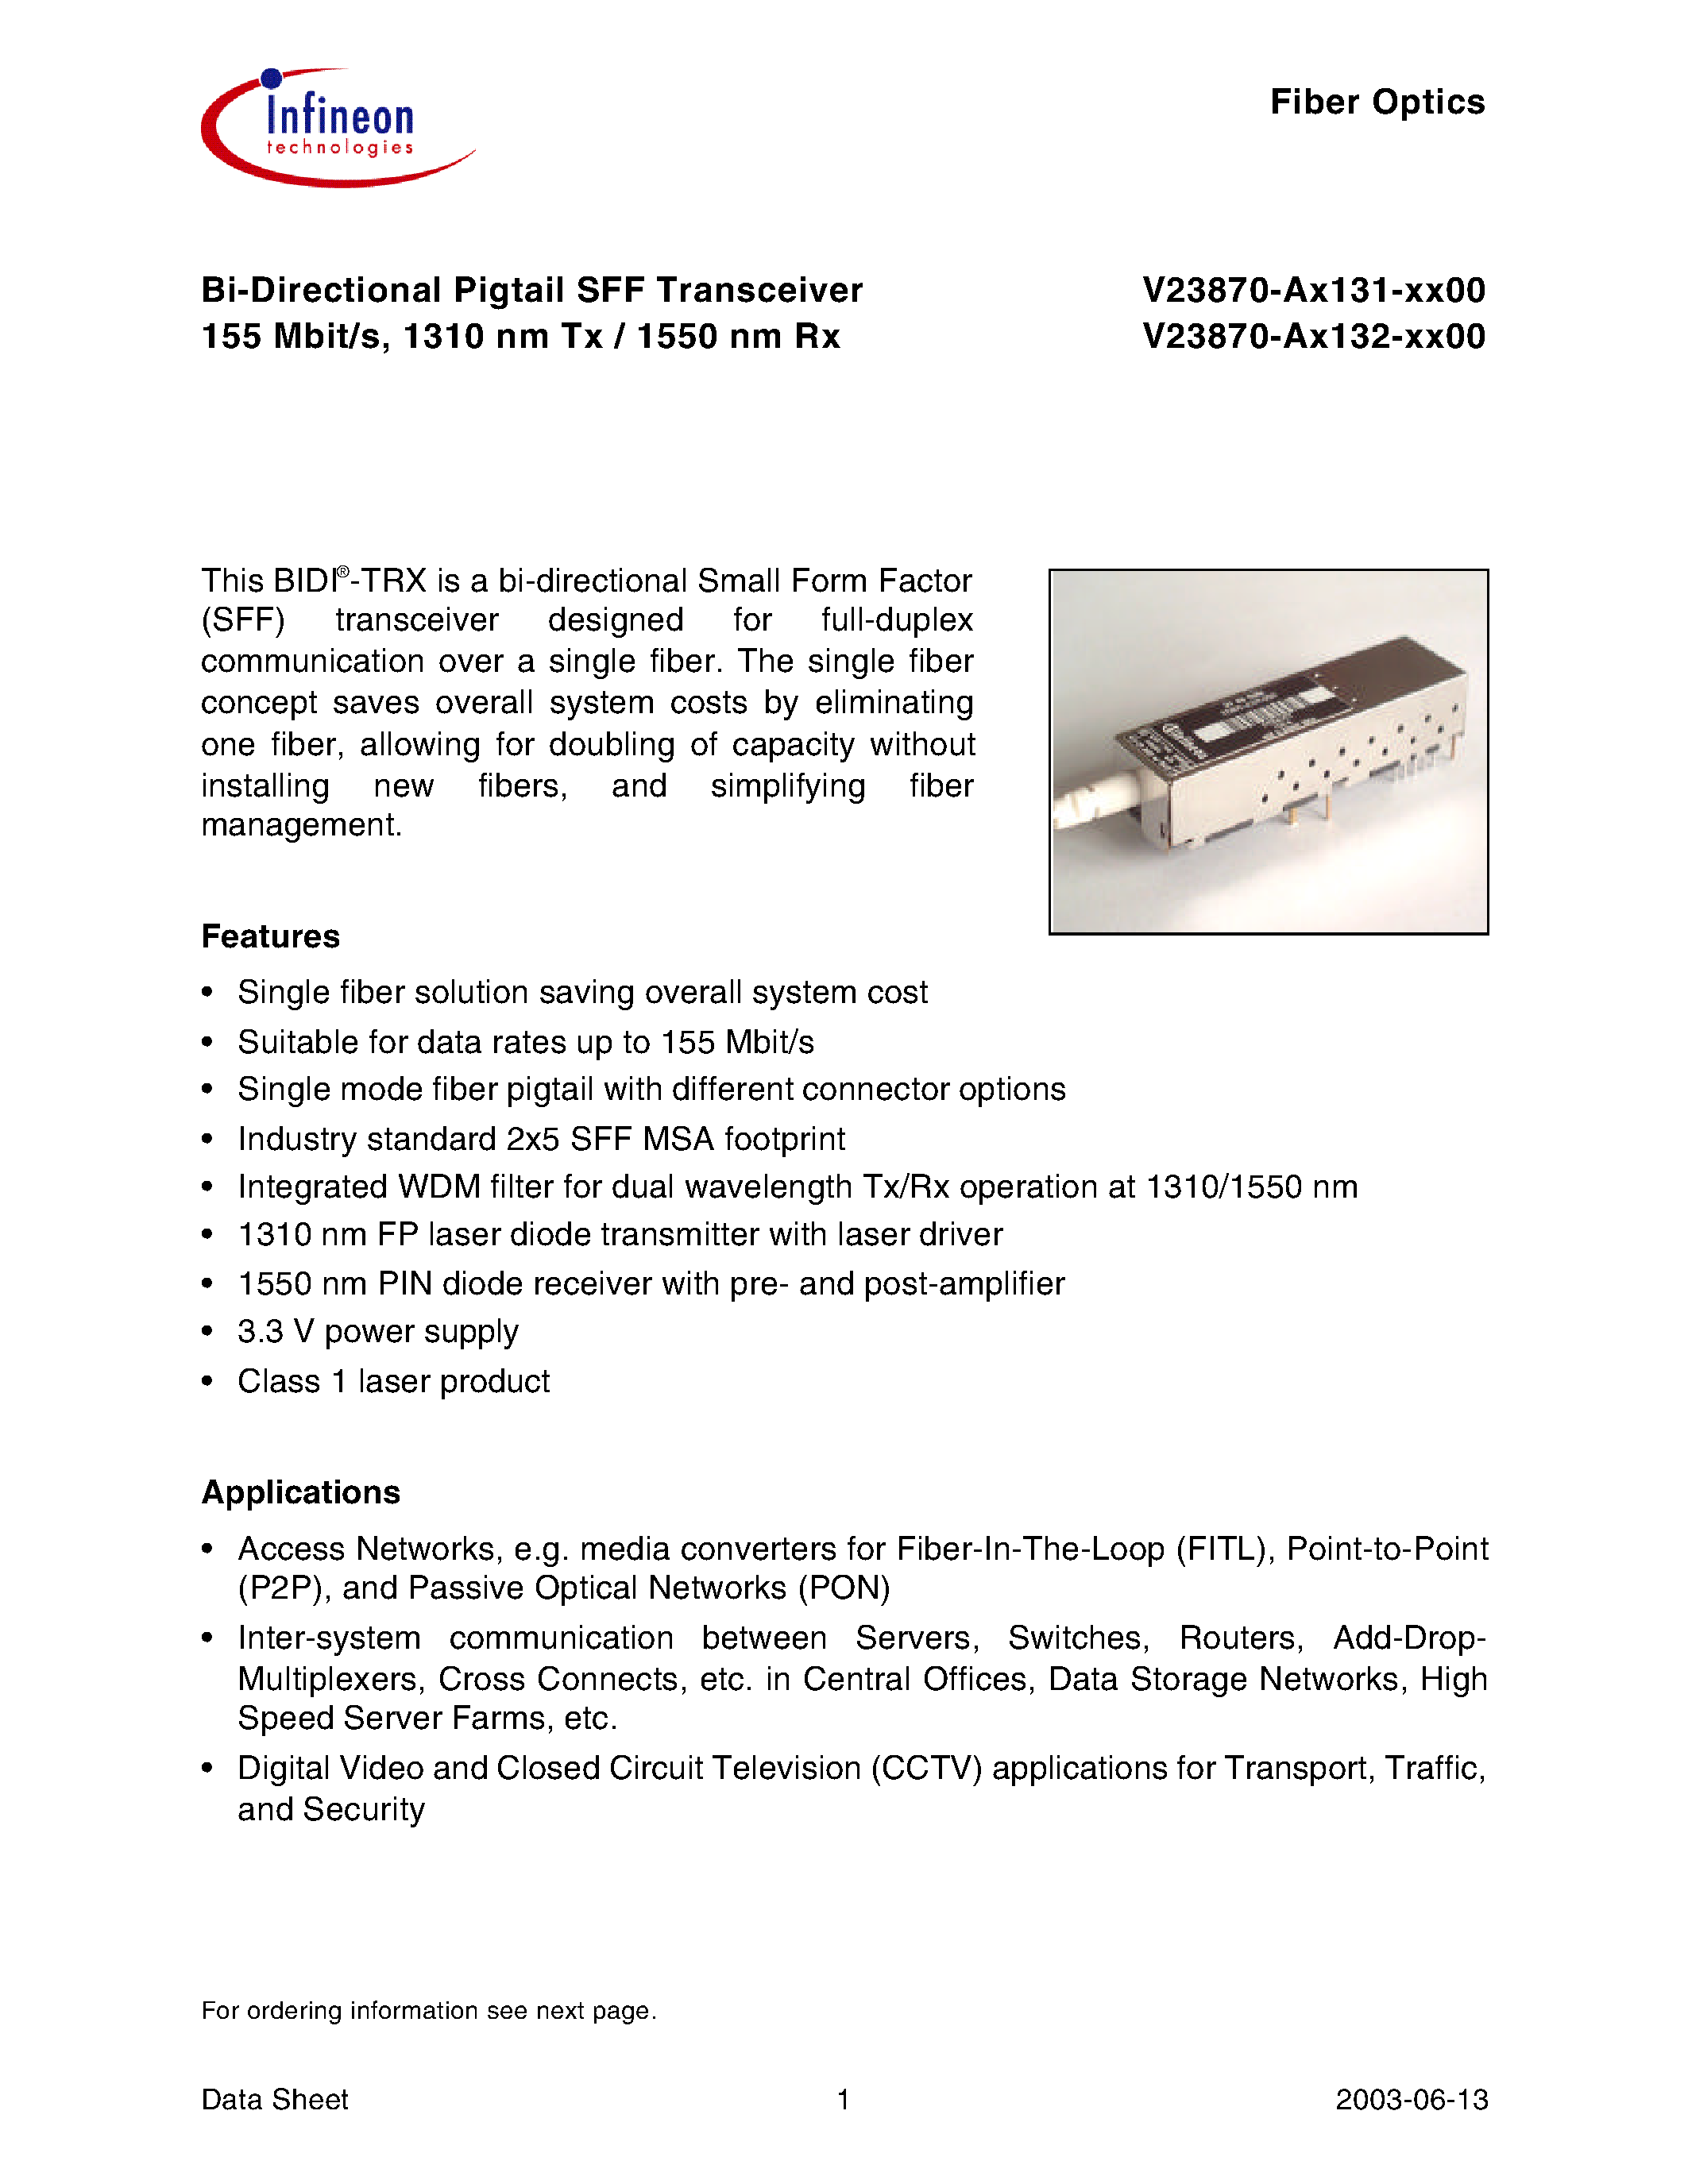 Datasheet V23870-A1132-B600 - Bi-Directional Pigtail SFF Transceiver 155 Mbit/s/ 1310 nm Tx / 1550 nm Rx page 1